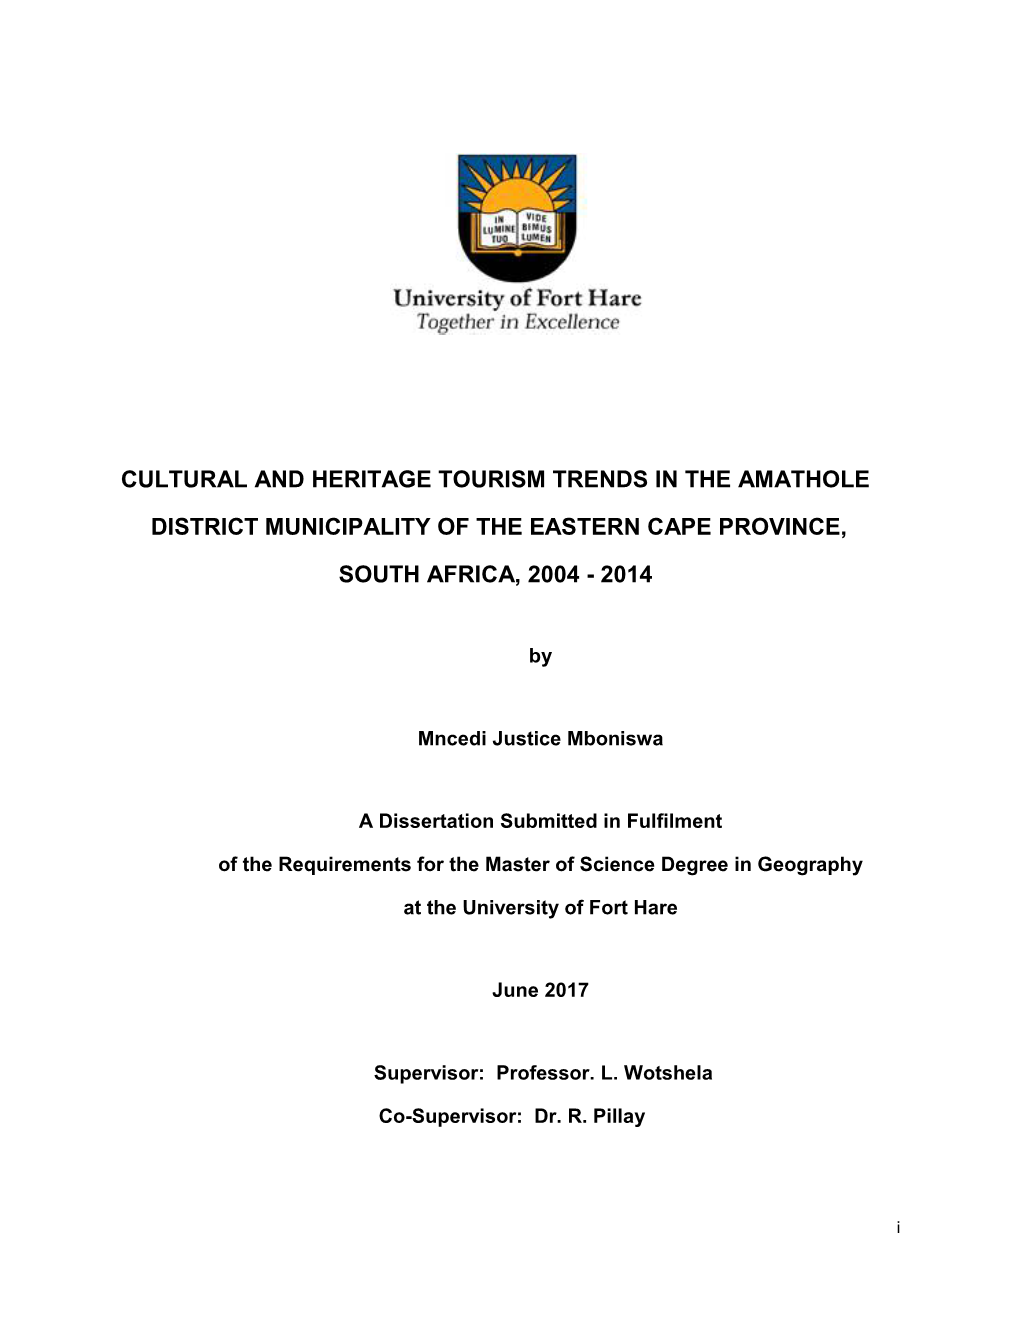 Cultural and Heritage Tourism Trends in the Amathole District Municipality of the Eastern Cape Province, South Africa, 2004